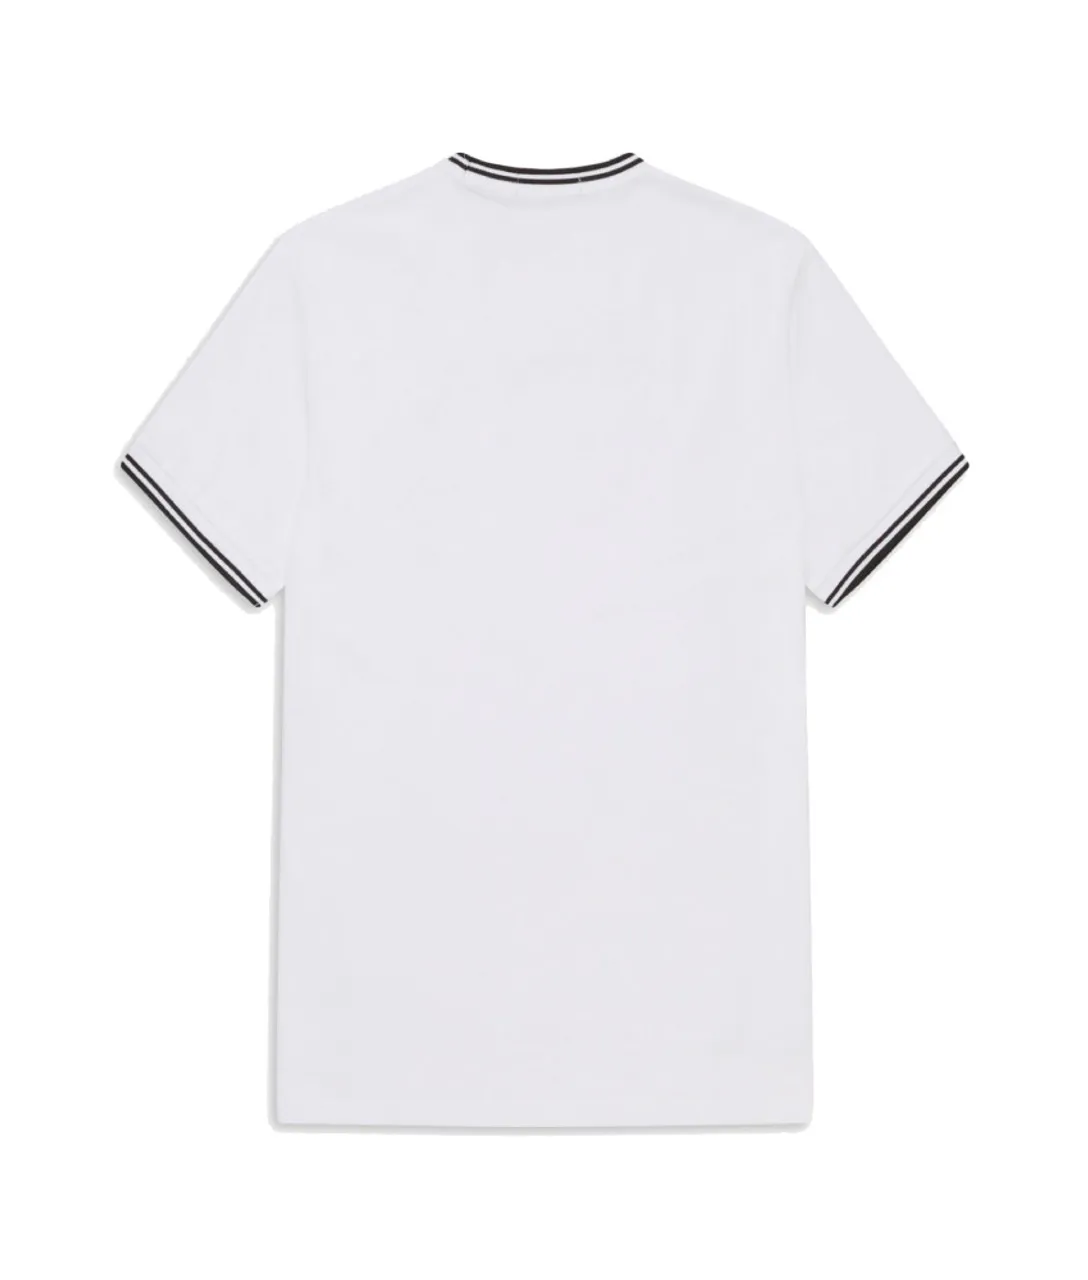 Fred Perry Twin tipped tee